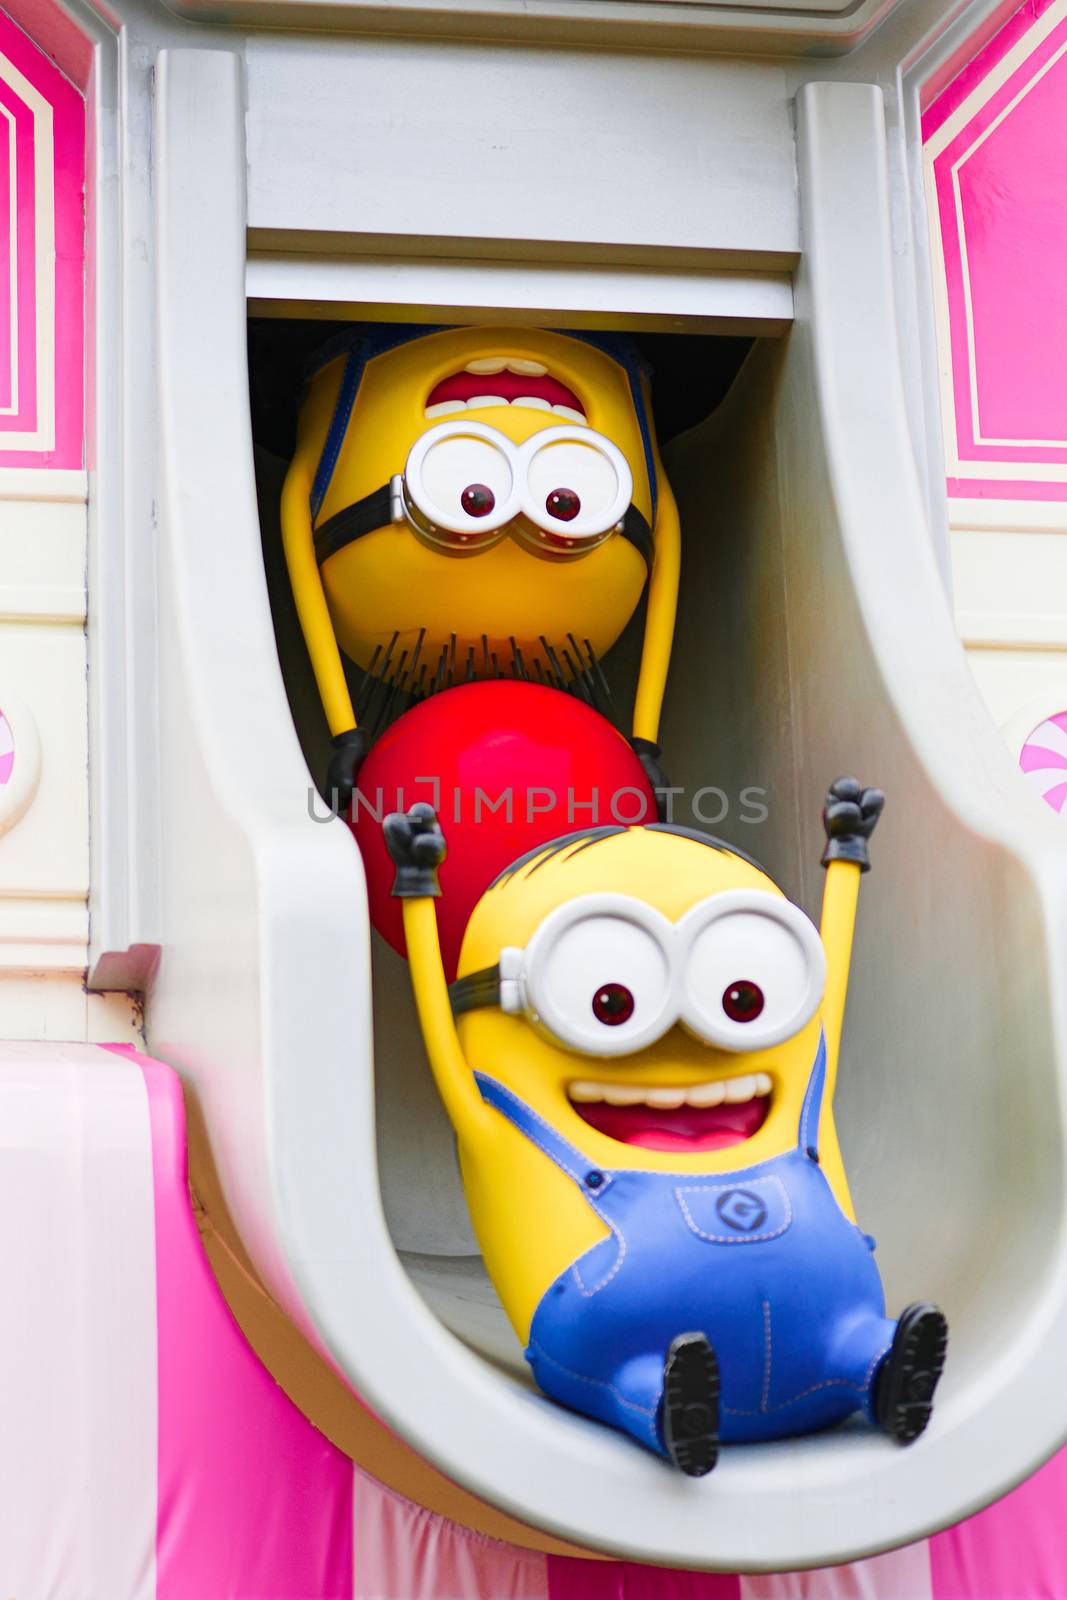 OSAKA, JAPAN - June 24, 2017 : Statue of "HAPPY MINION", located in Universal Studios Japan, Osaka, Japan. Minions are famous character from Despicable Me animation_A